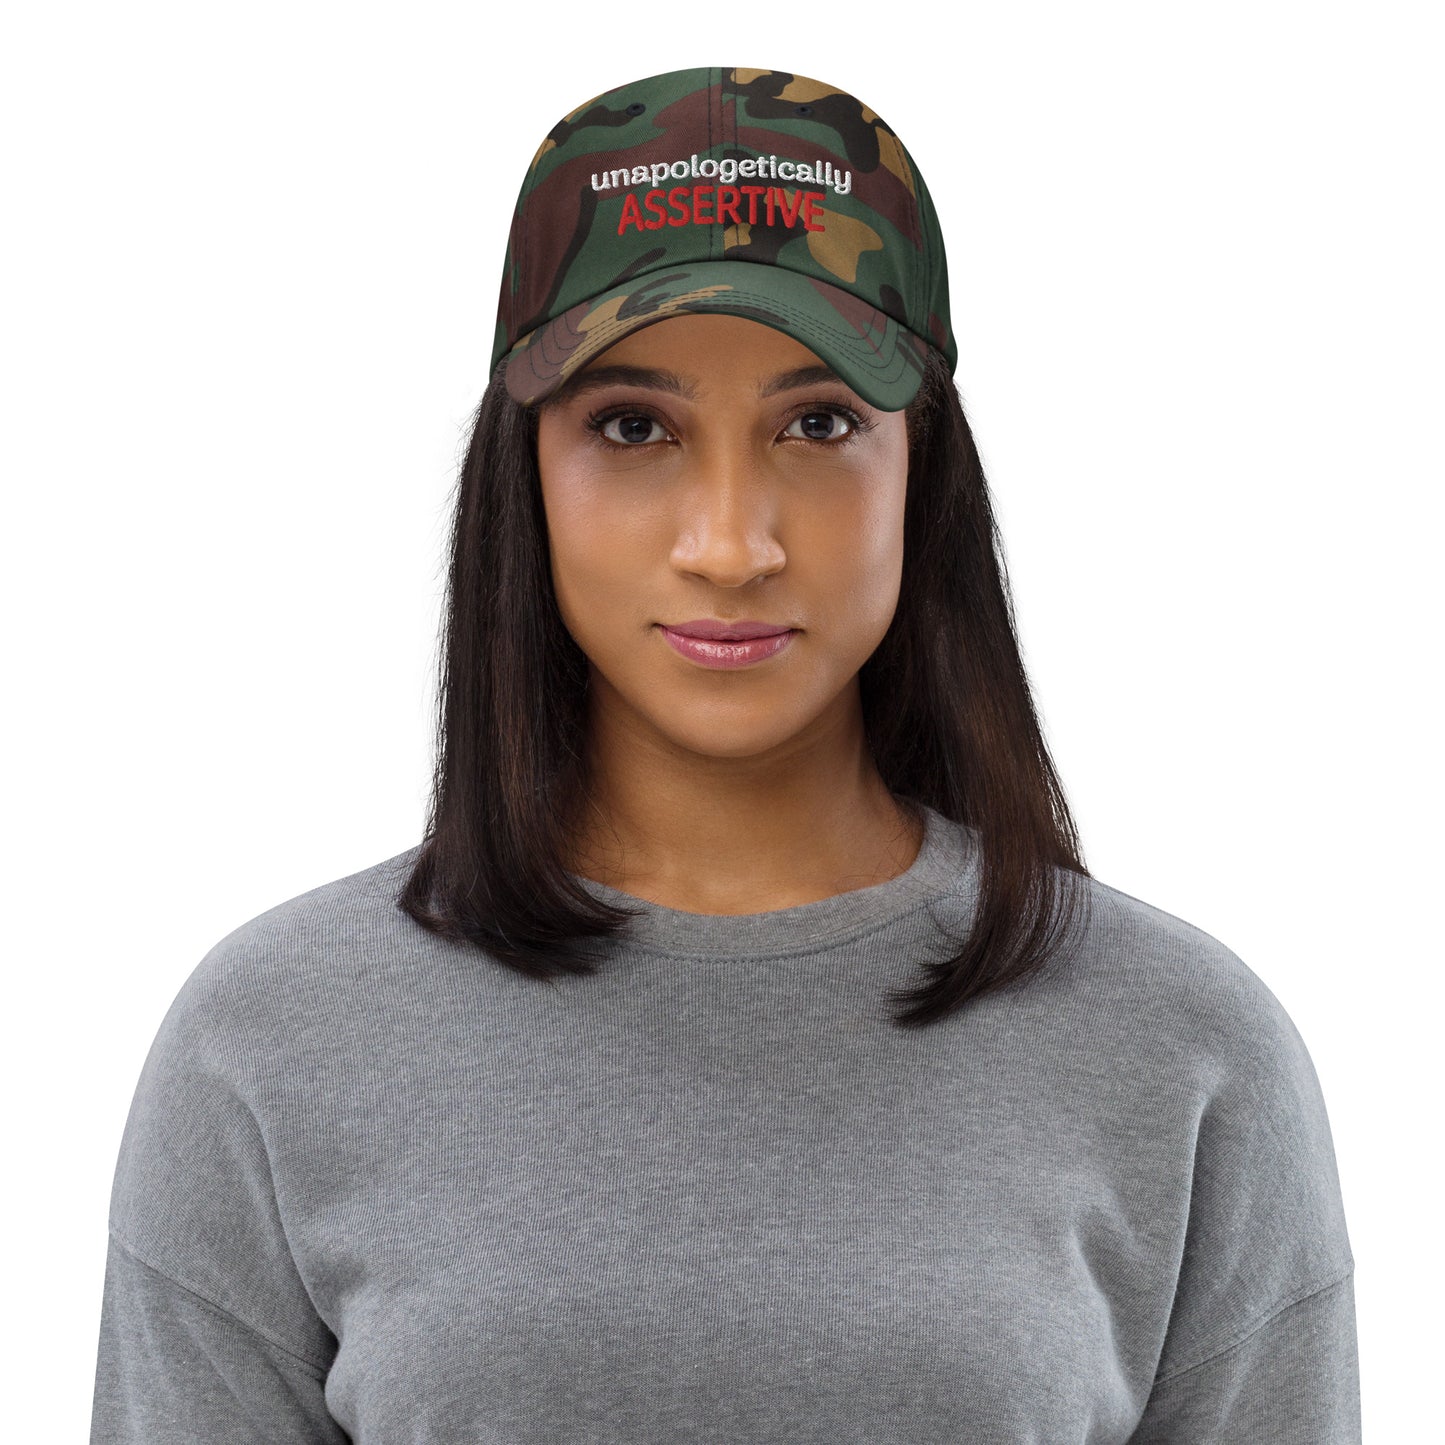 Unapologetically Assertive Dad Hat